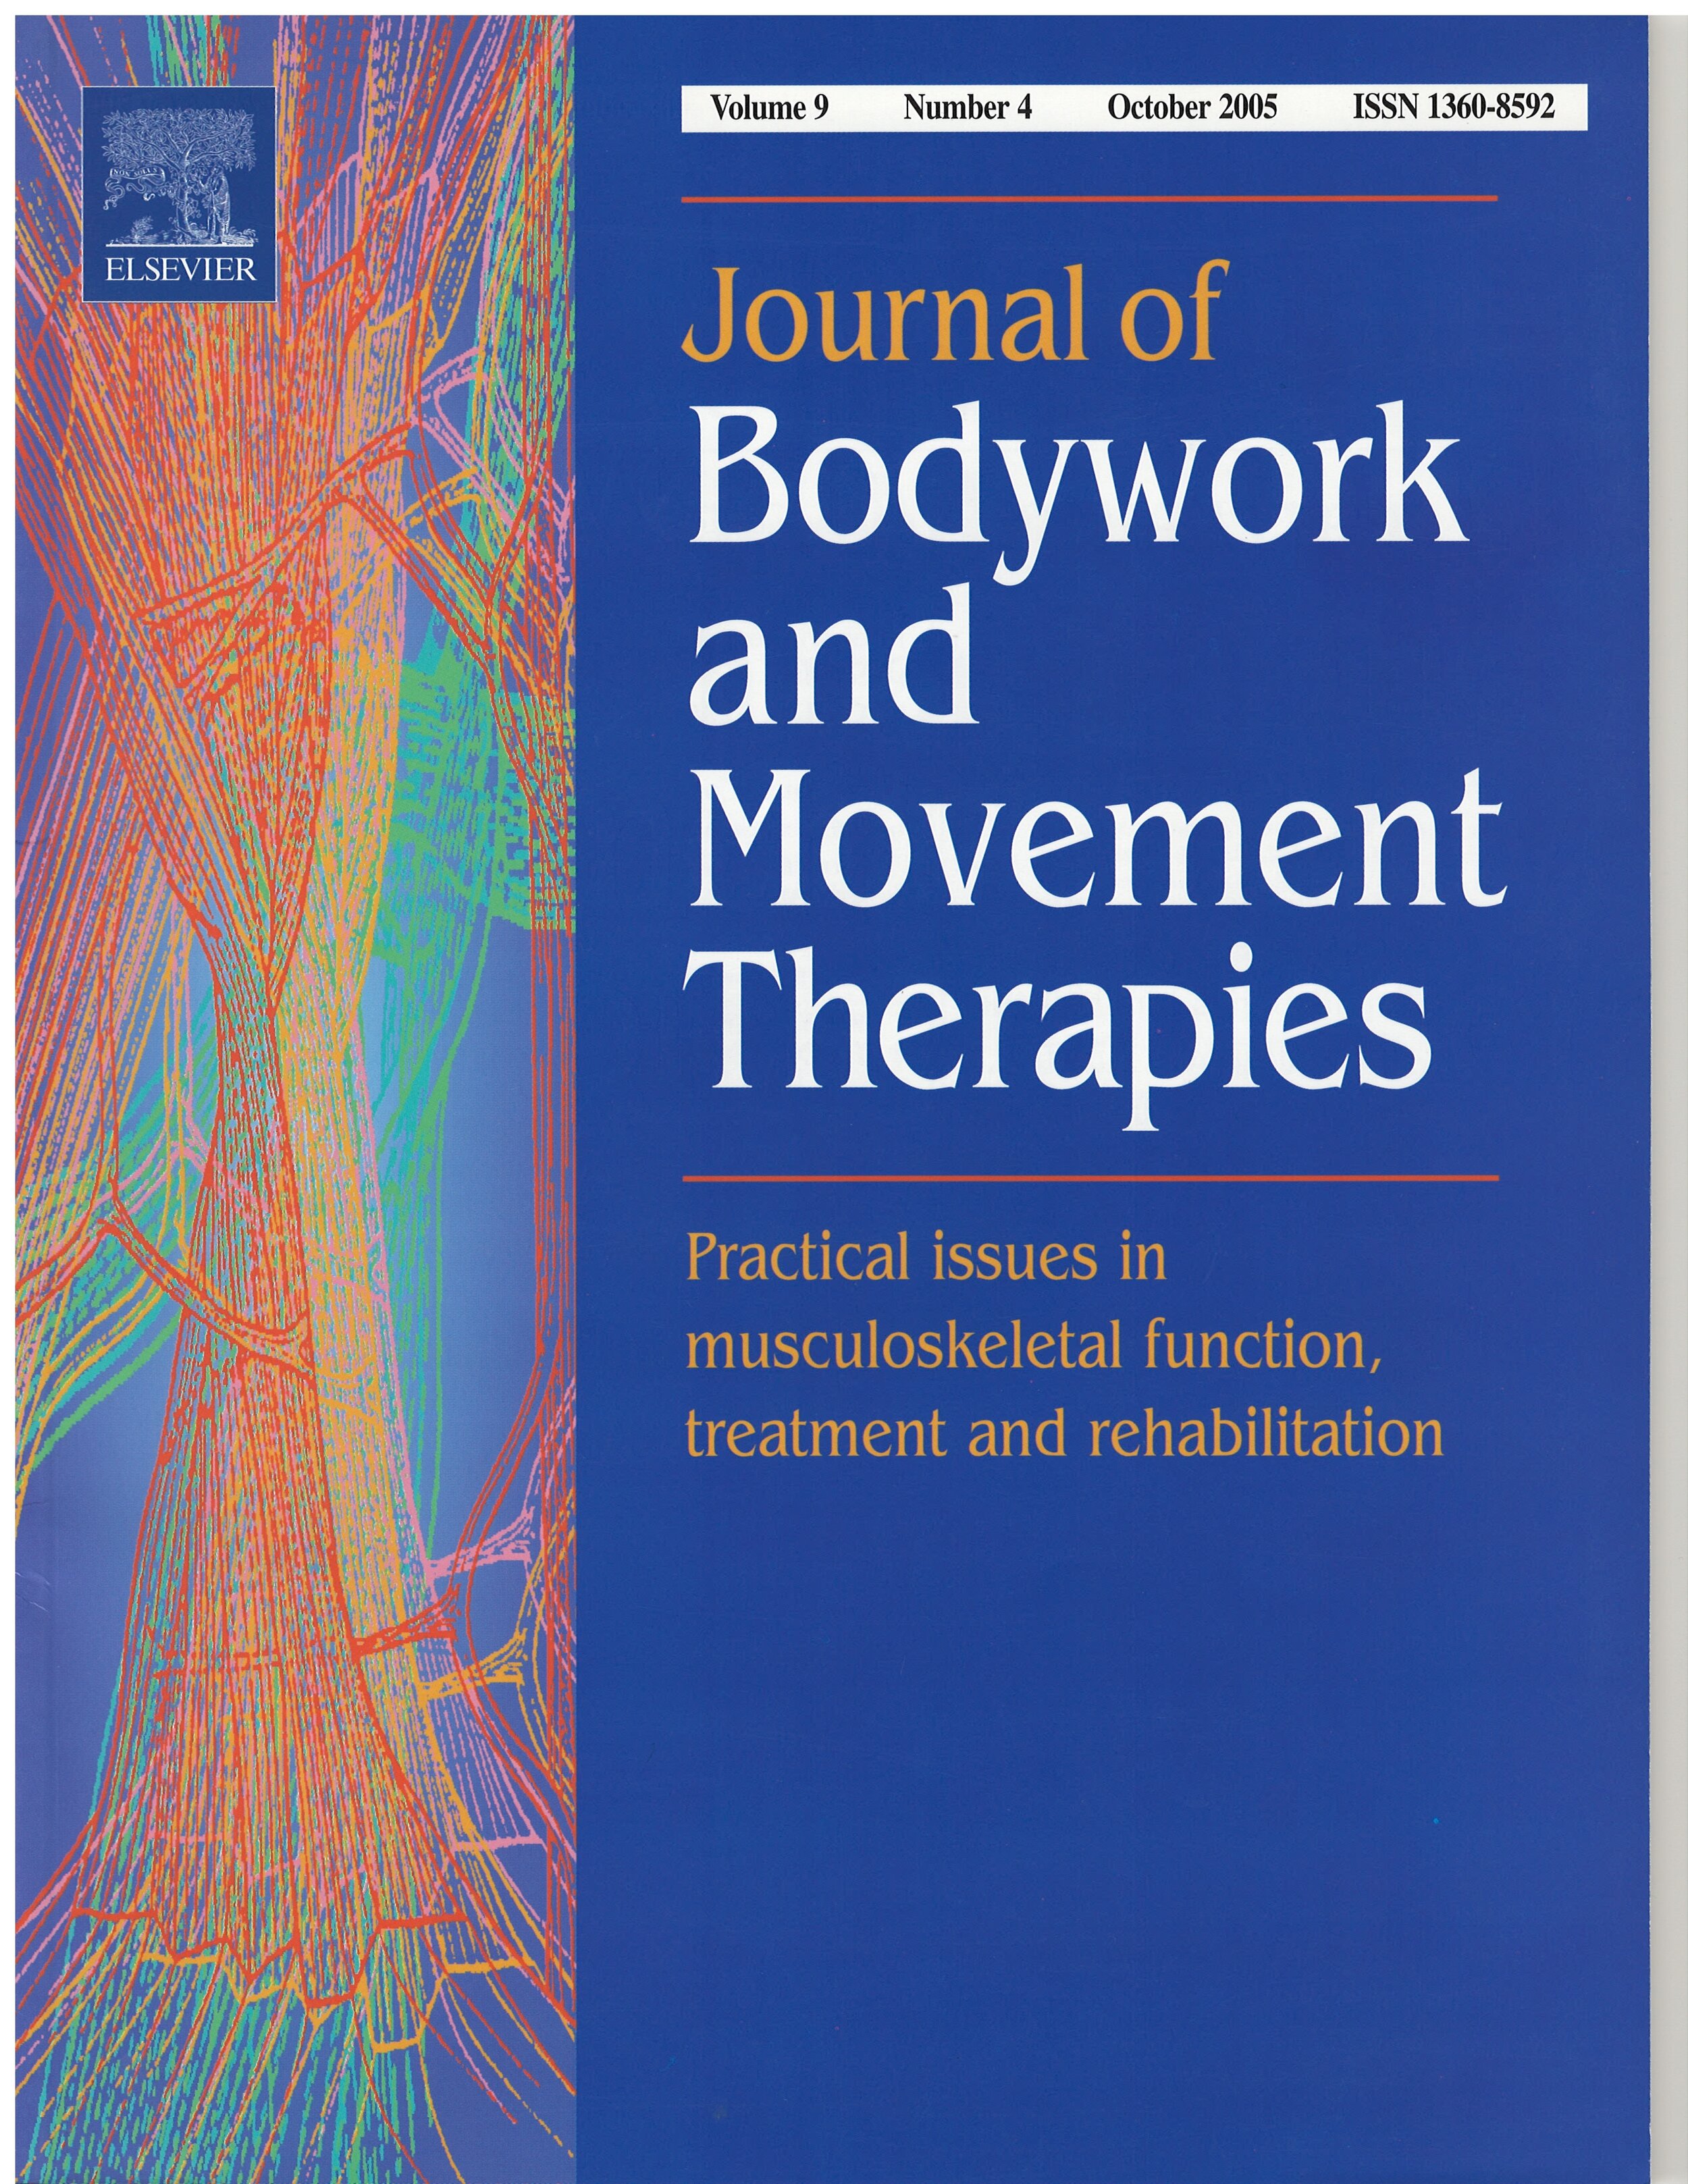 Journal of Bodywork and Movement Therapies Cover 2005.jpg